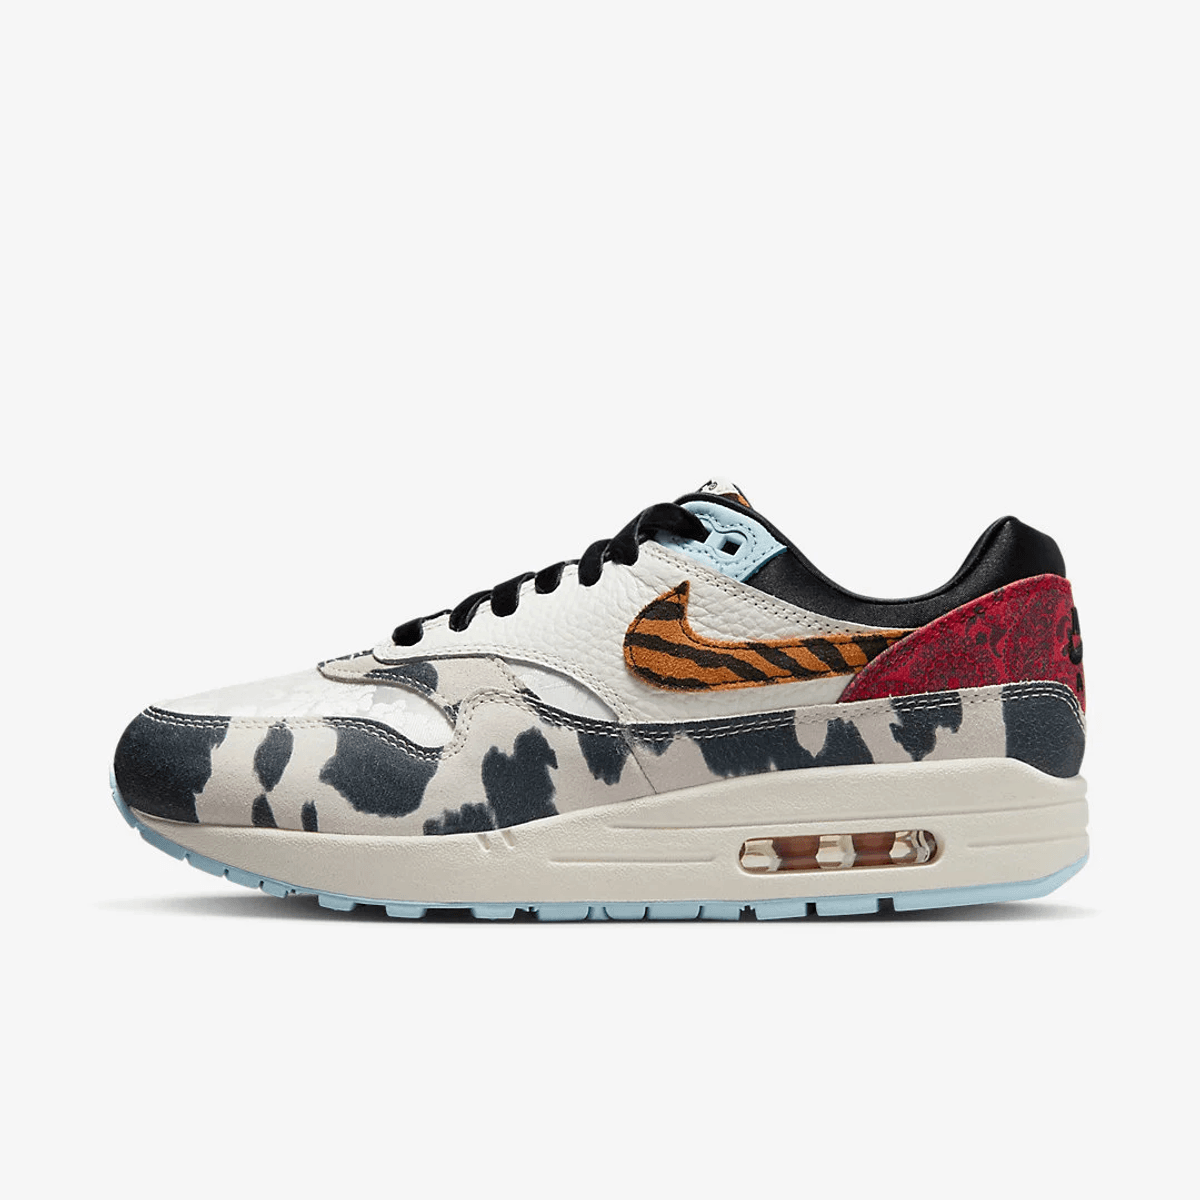 The Nike Air Max 1 '87 Great Indoors Releases This Month